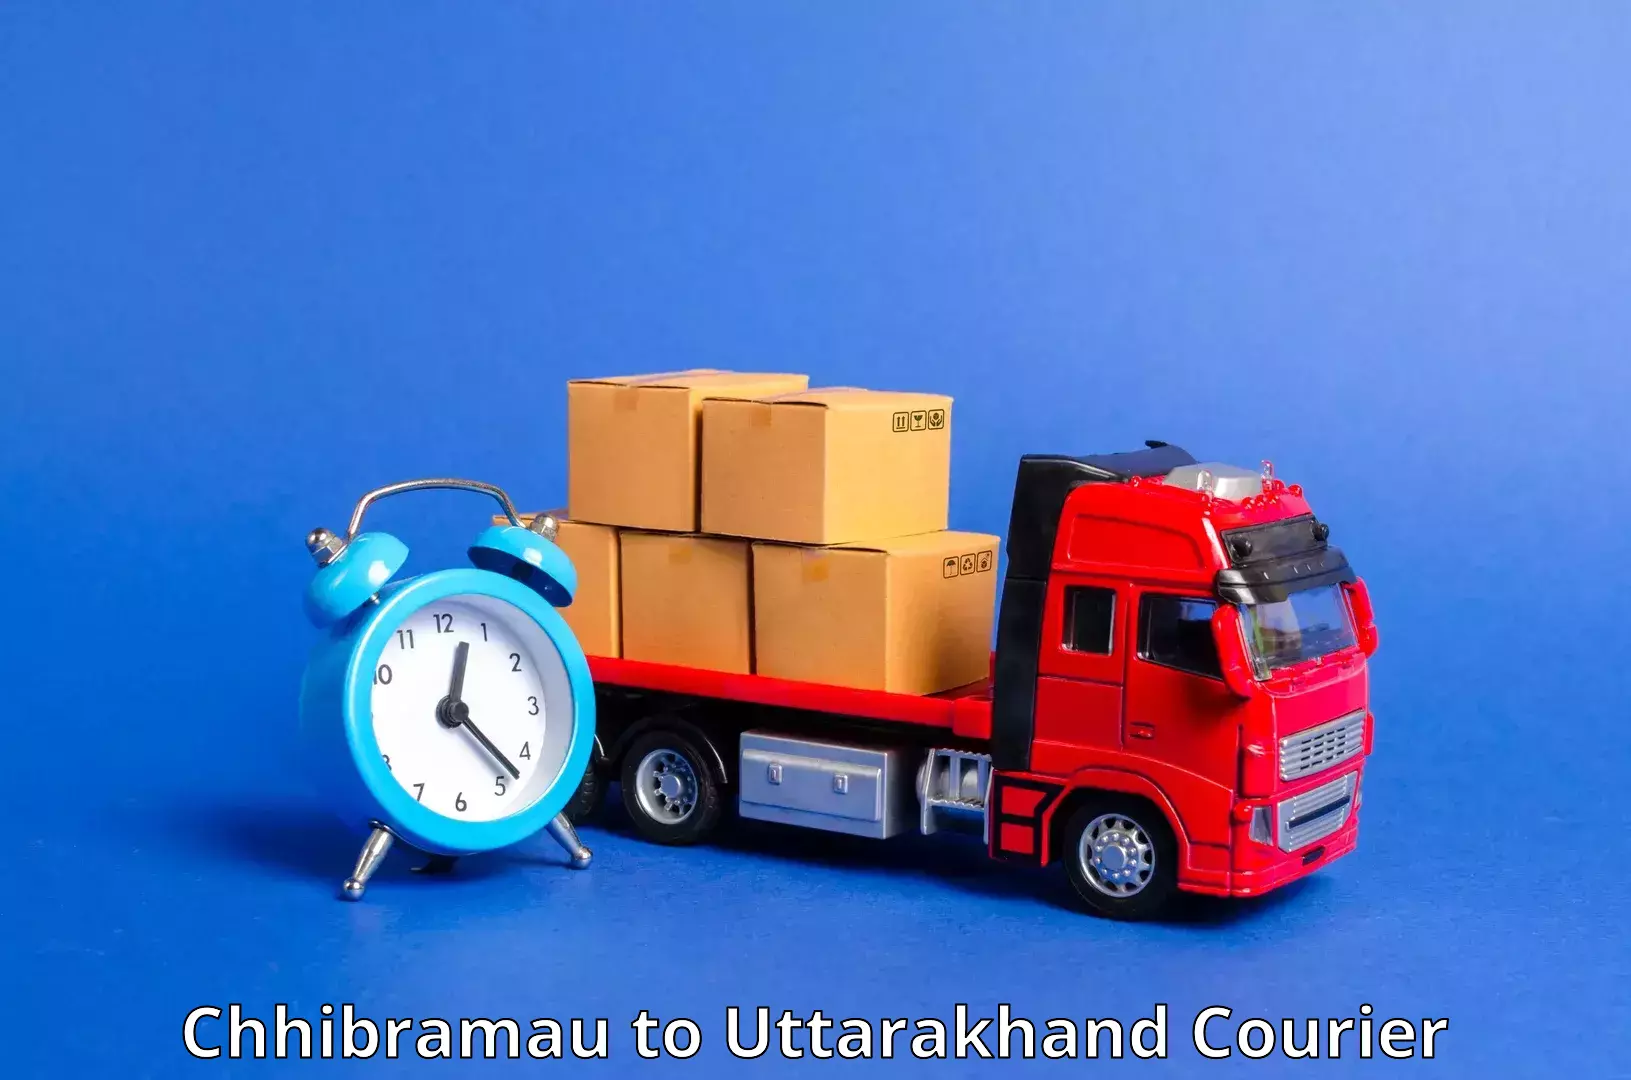 Scheduled delivery in Chhibramau to Mussoorie